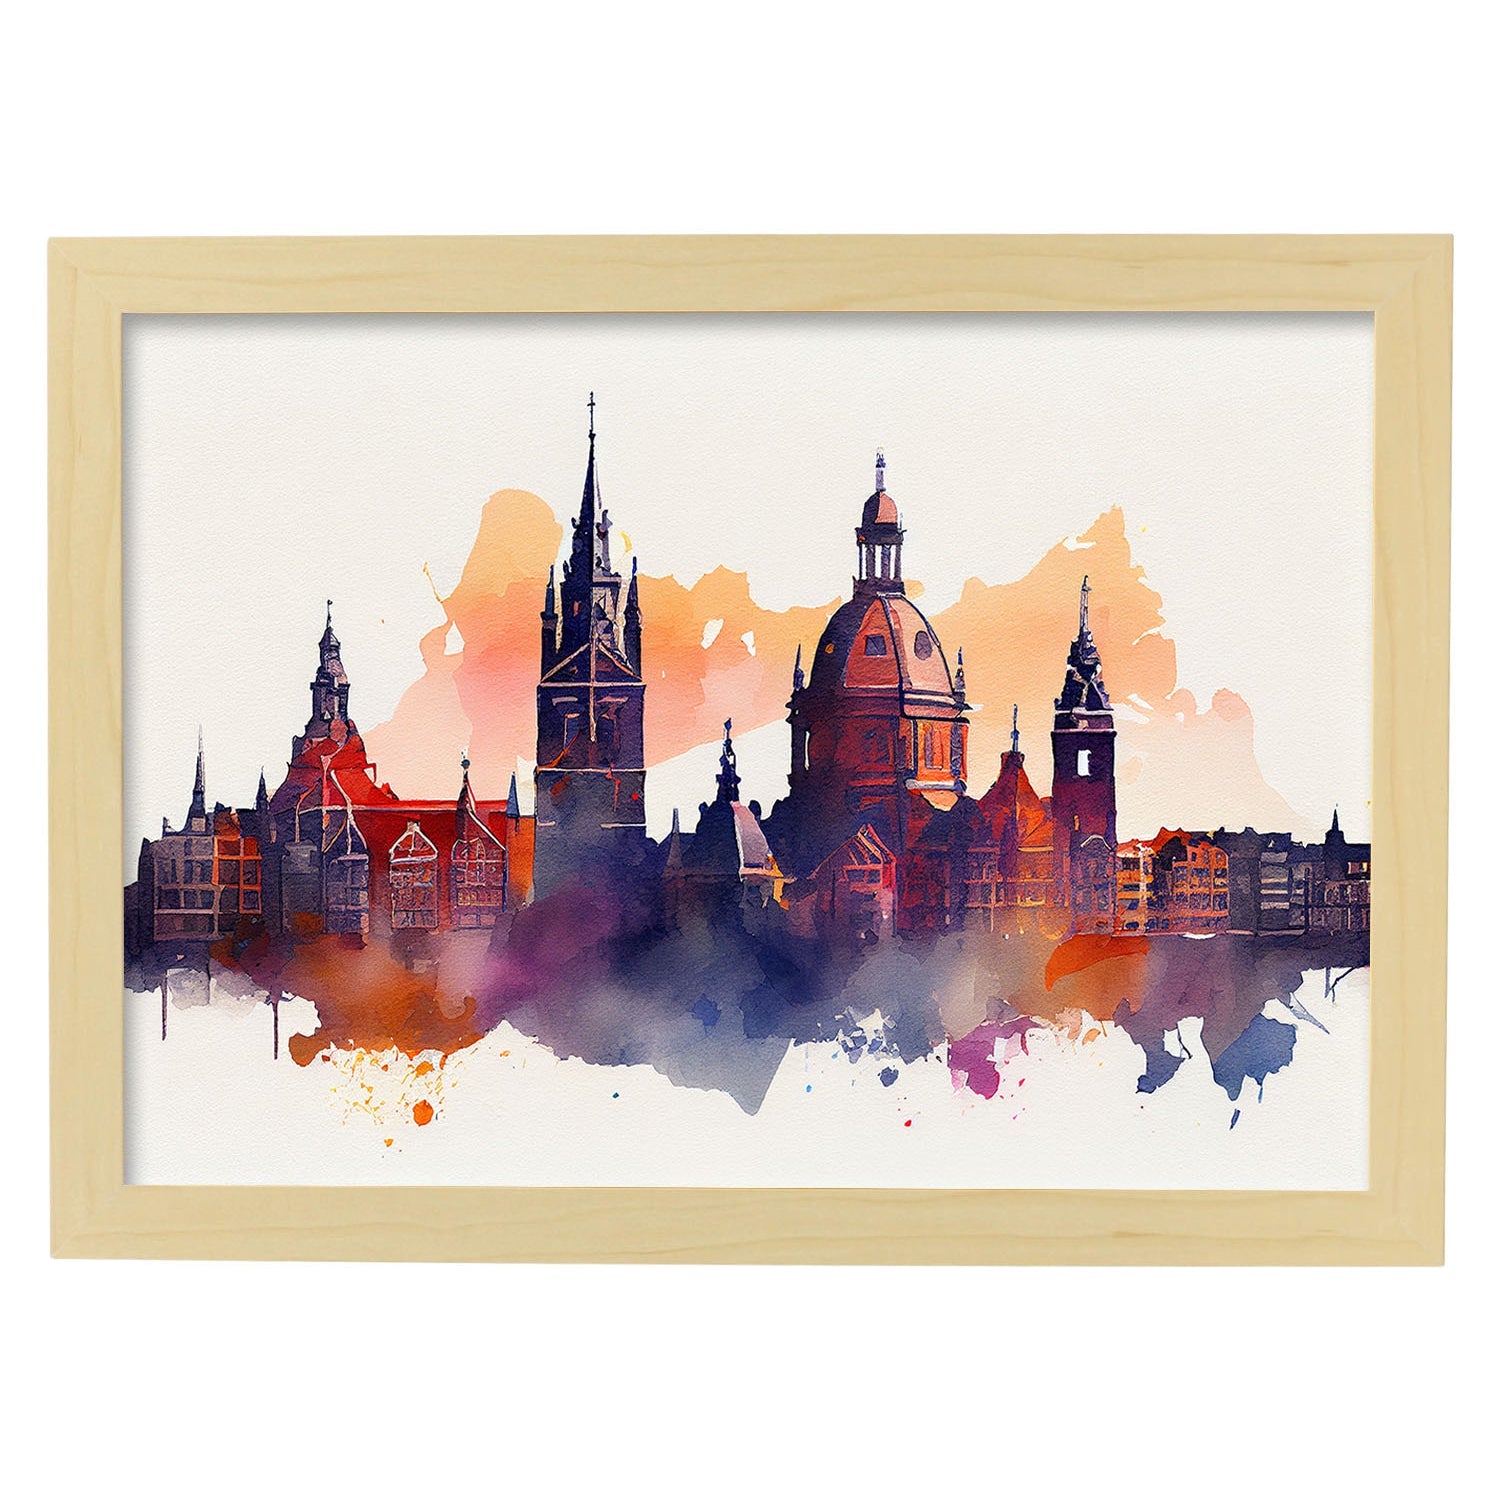 Nacnic watercolor of a skyline of the city of Amsterdam_2. Aesthetic Wall Art Prints for Bedroom or Living Room Design.-Artwork-Nacnic-A4-Marco Madera Clara-Nacnic Estudio SL